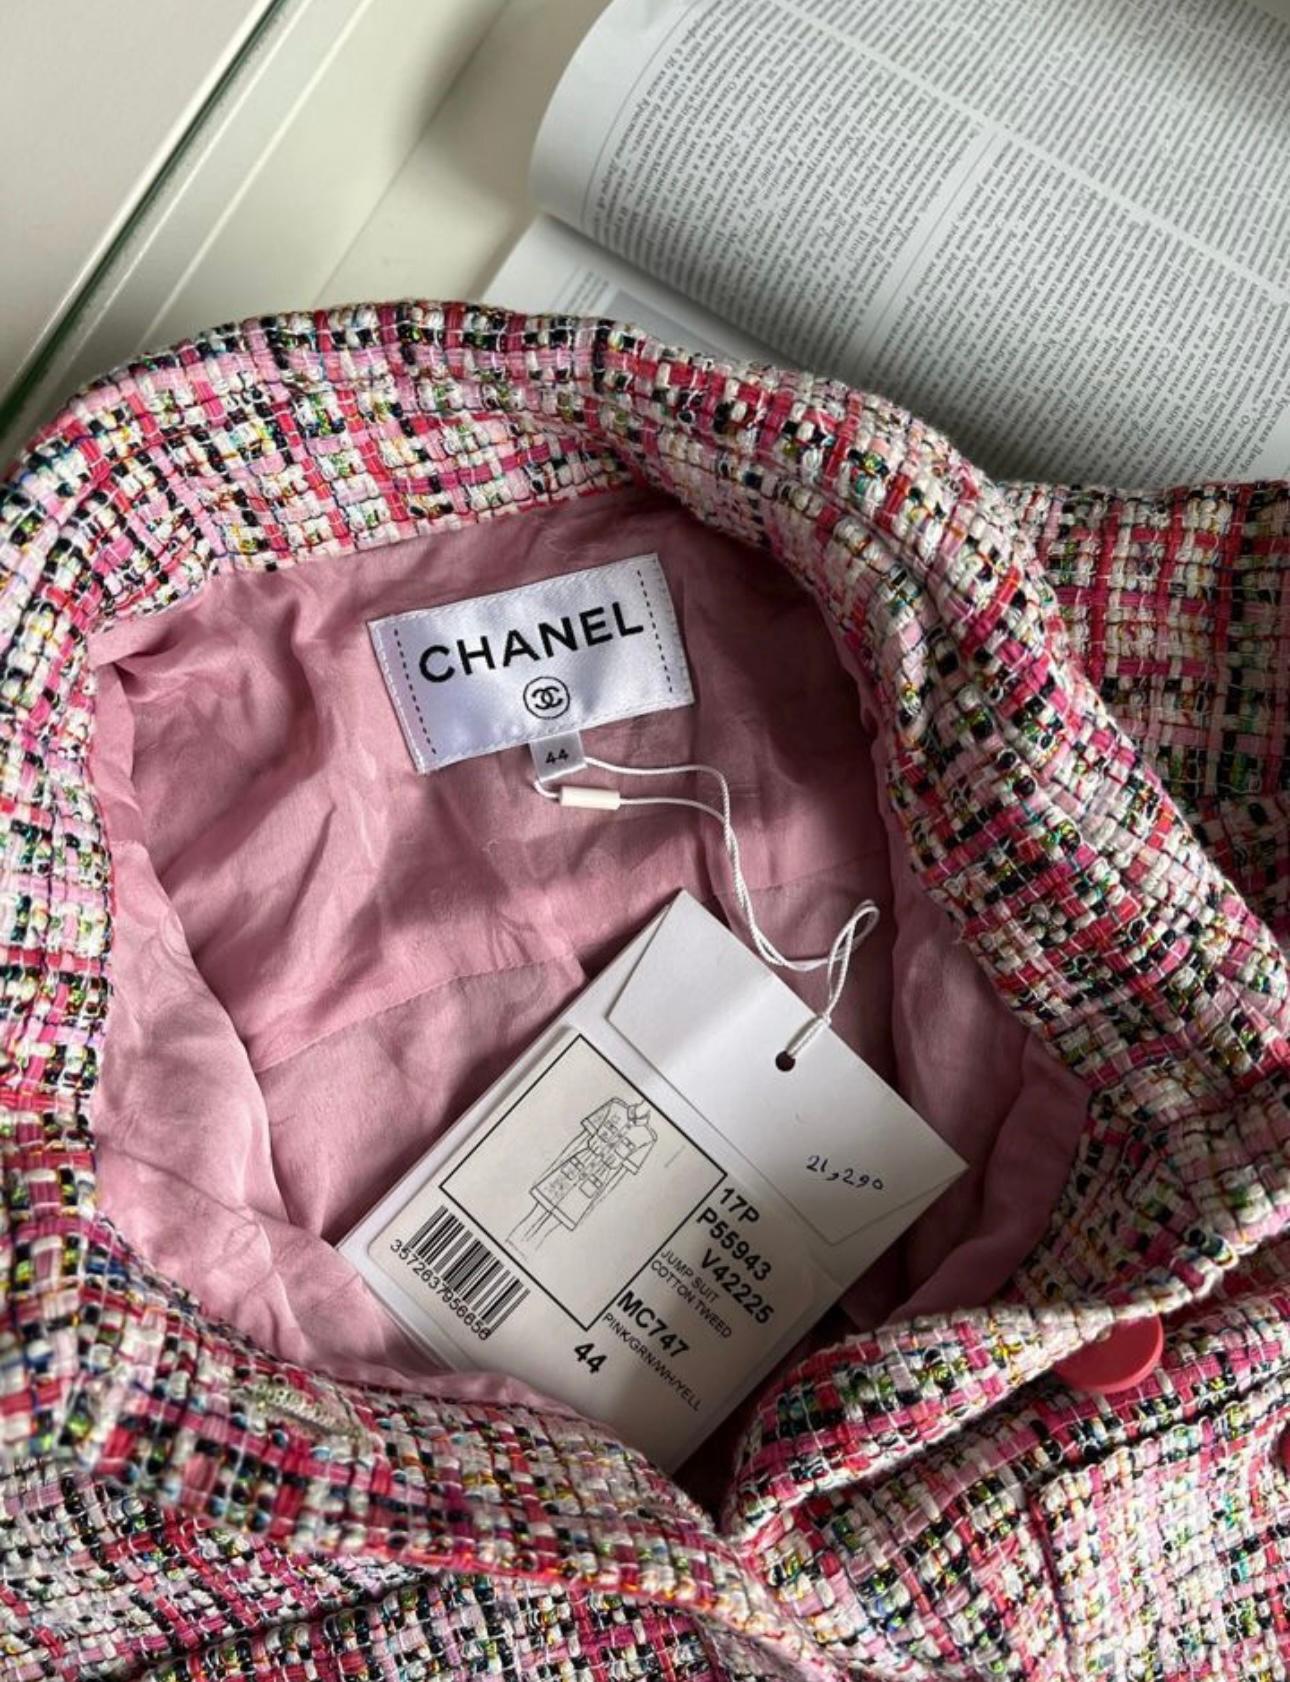 New Chanel pink jumpsuit made of most precious Lesage tweed!
- CC logo hologram 'lionhead' buttons
- tonal silk lining
Size mark 44 FR. Comes with tag attached.